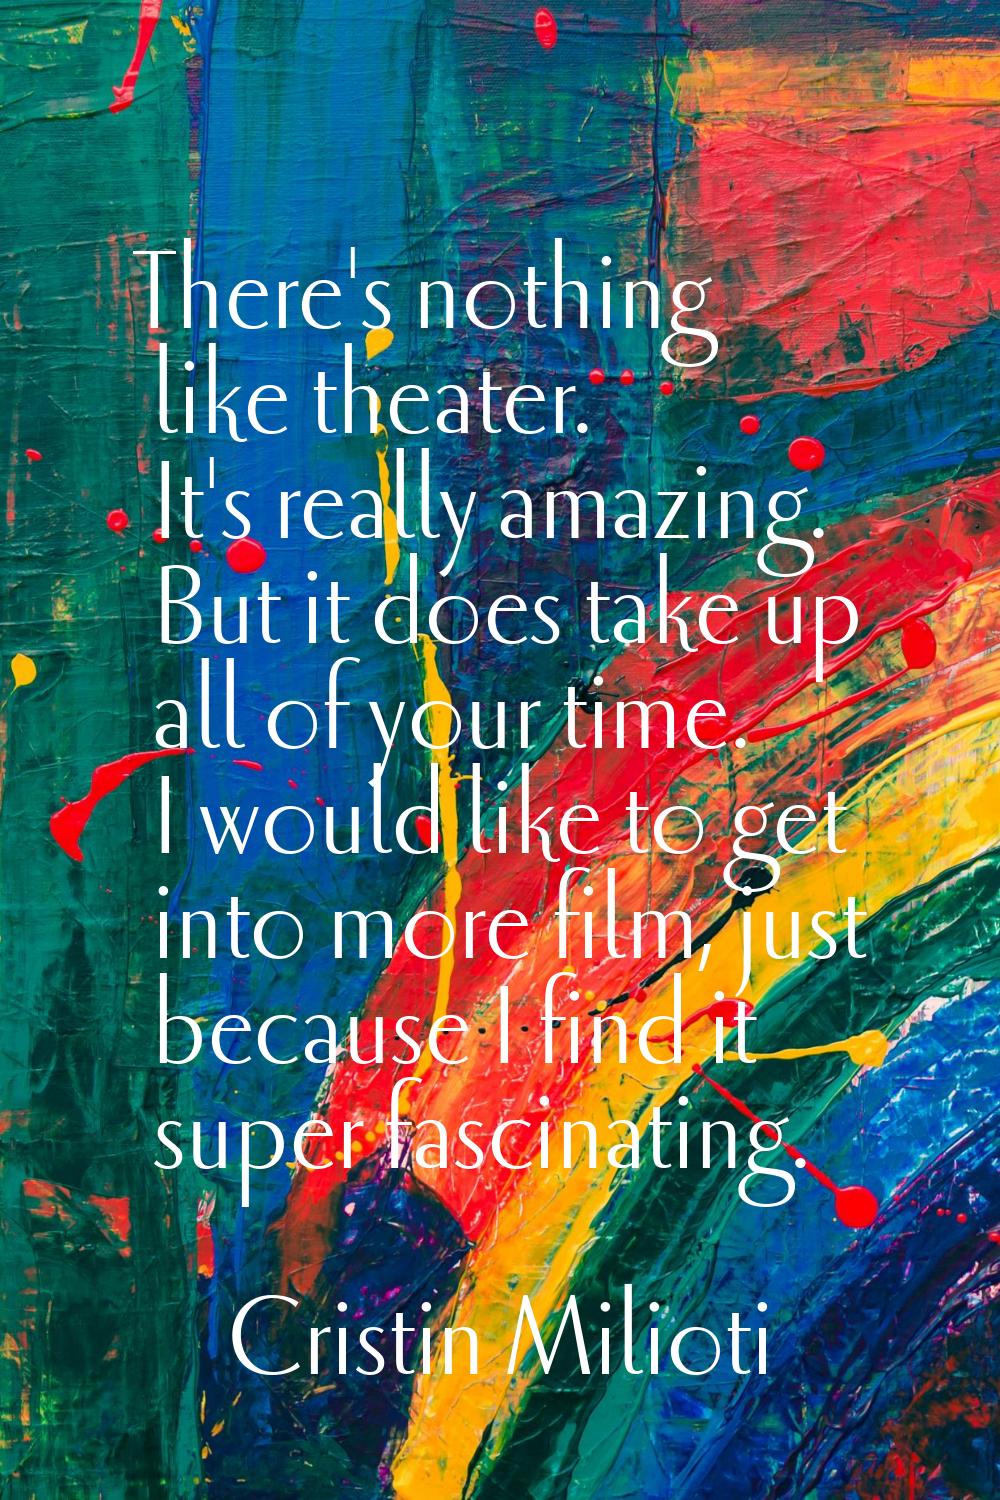 There's nothing like theater. It's really amazing. But it does take up all of your time. I would li